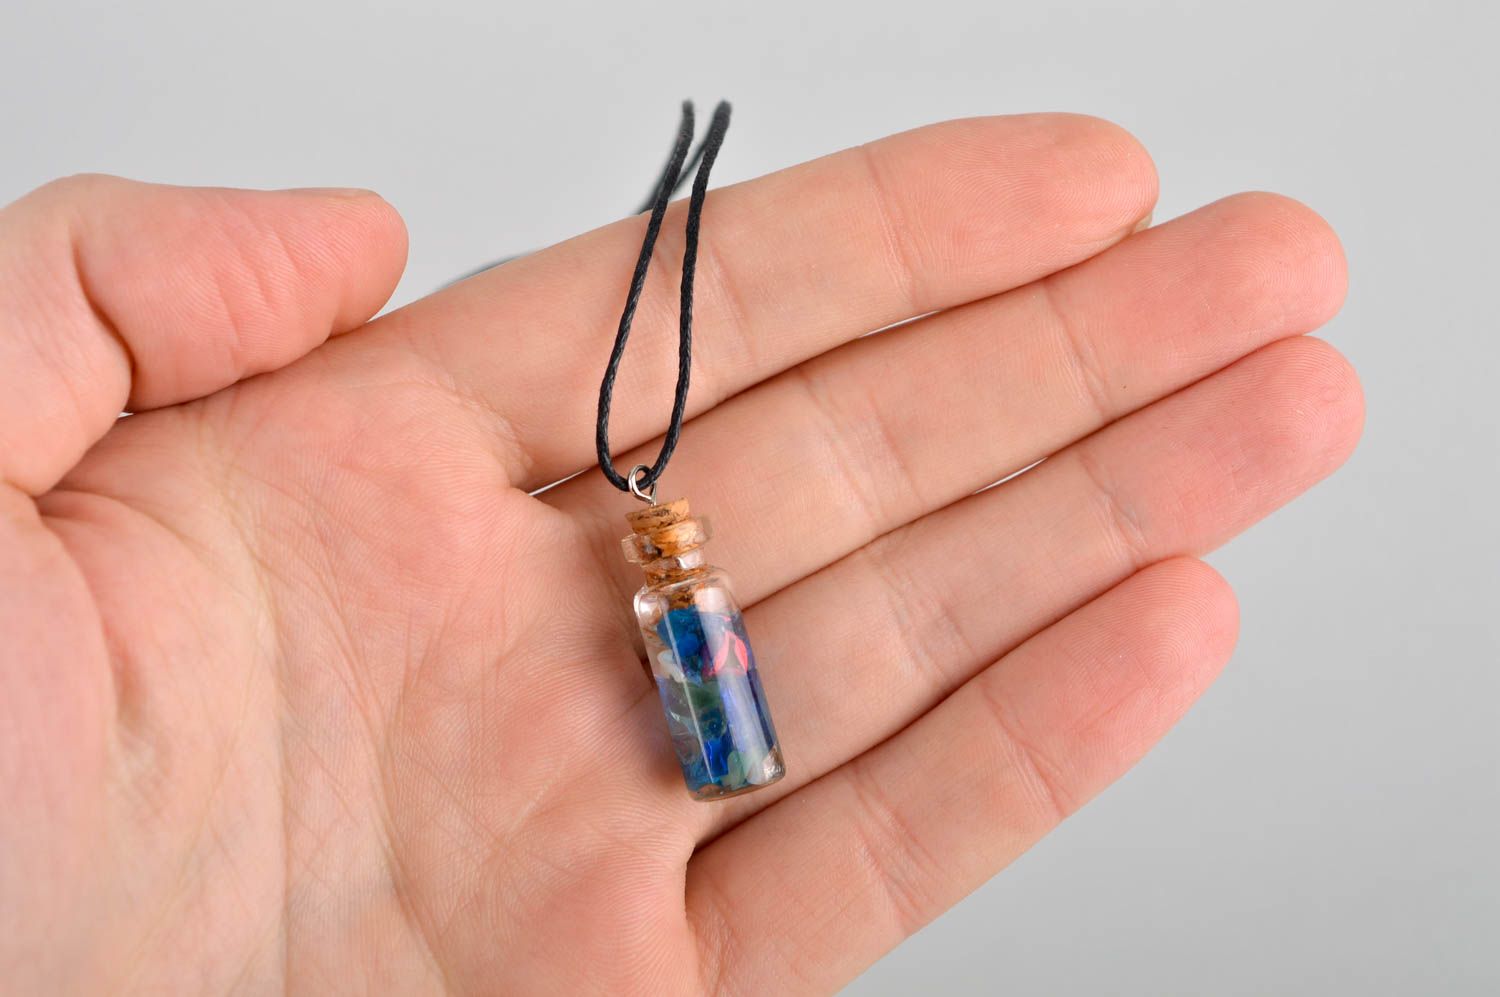 Handmade glass vial charm long necklace designer necklaces for women cool gifts photo 5